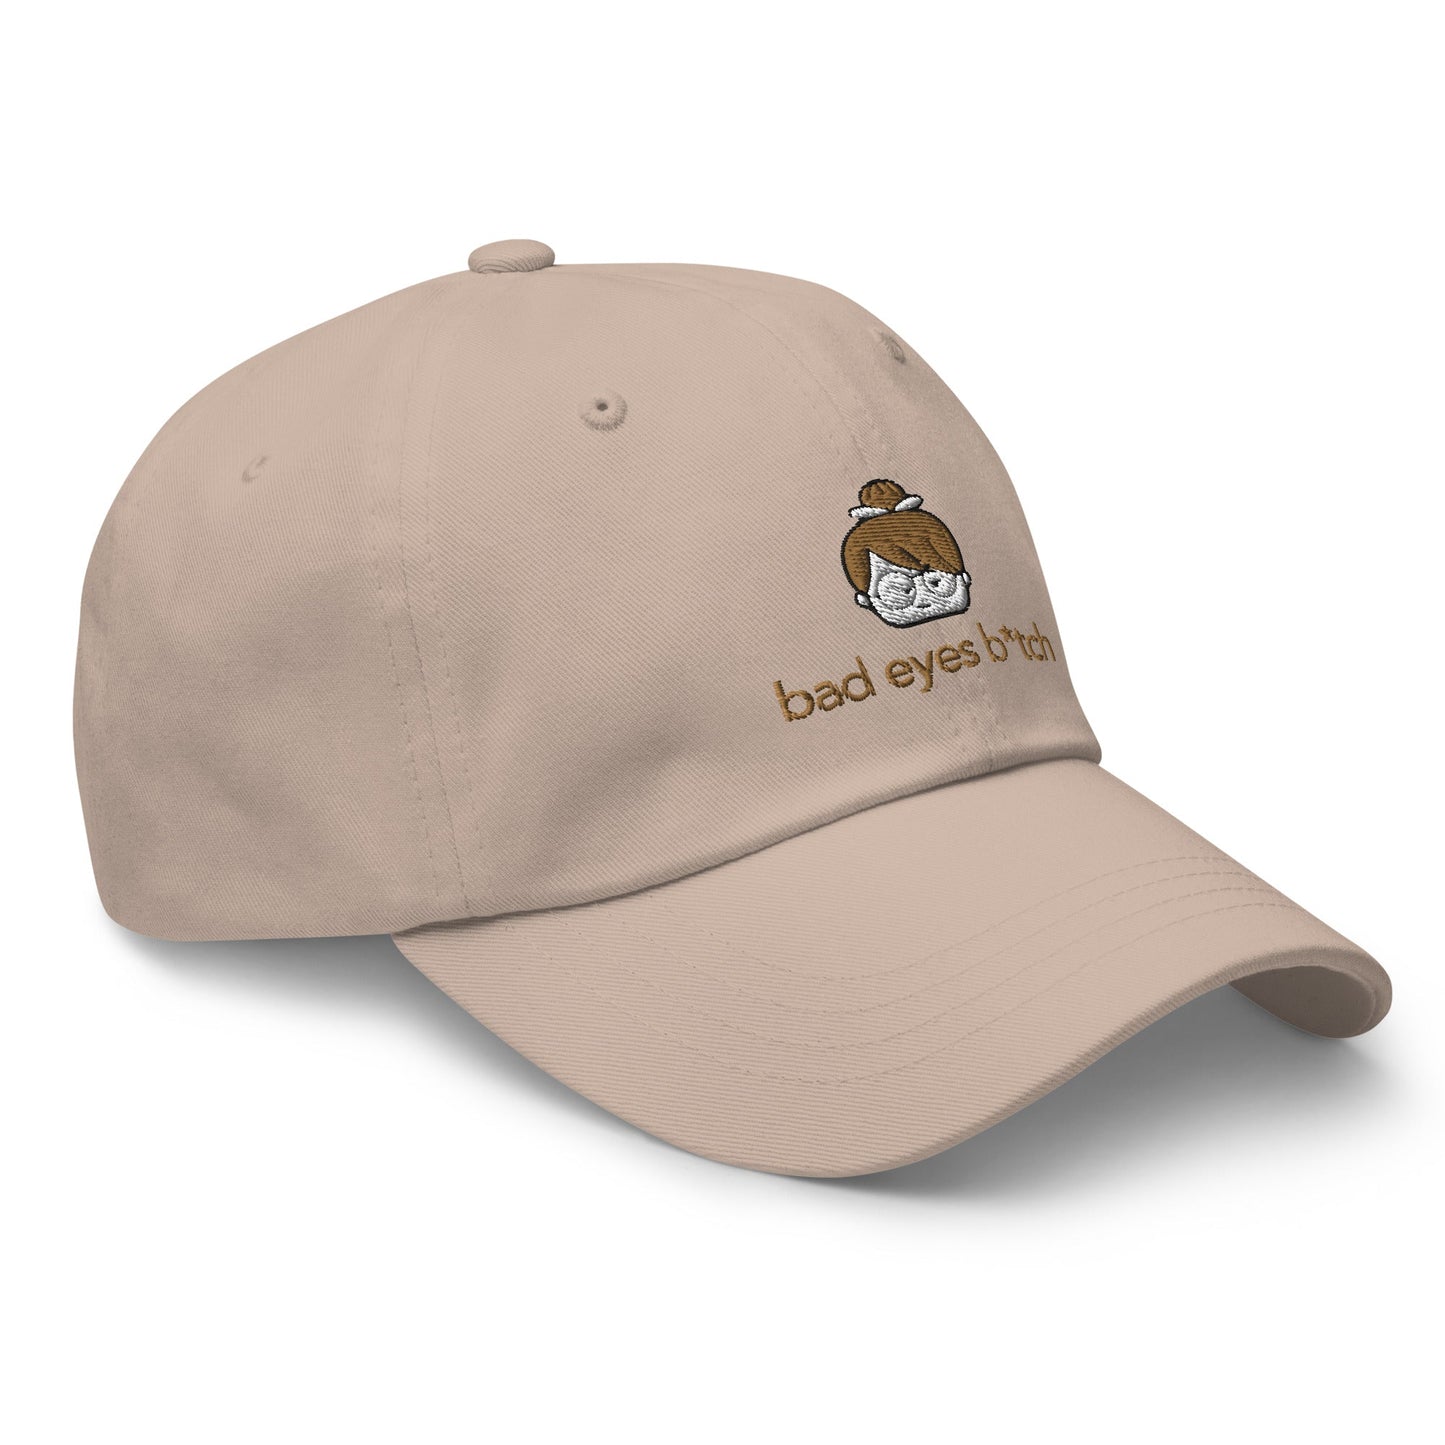 Bad Eyes B*tch Embroidered Classic Hat - chucklecouture co.